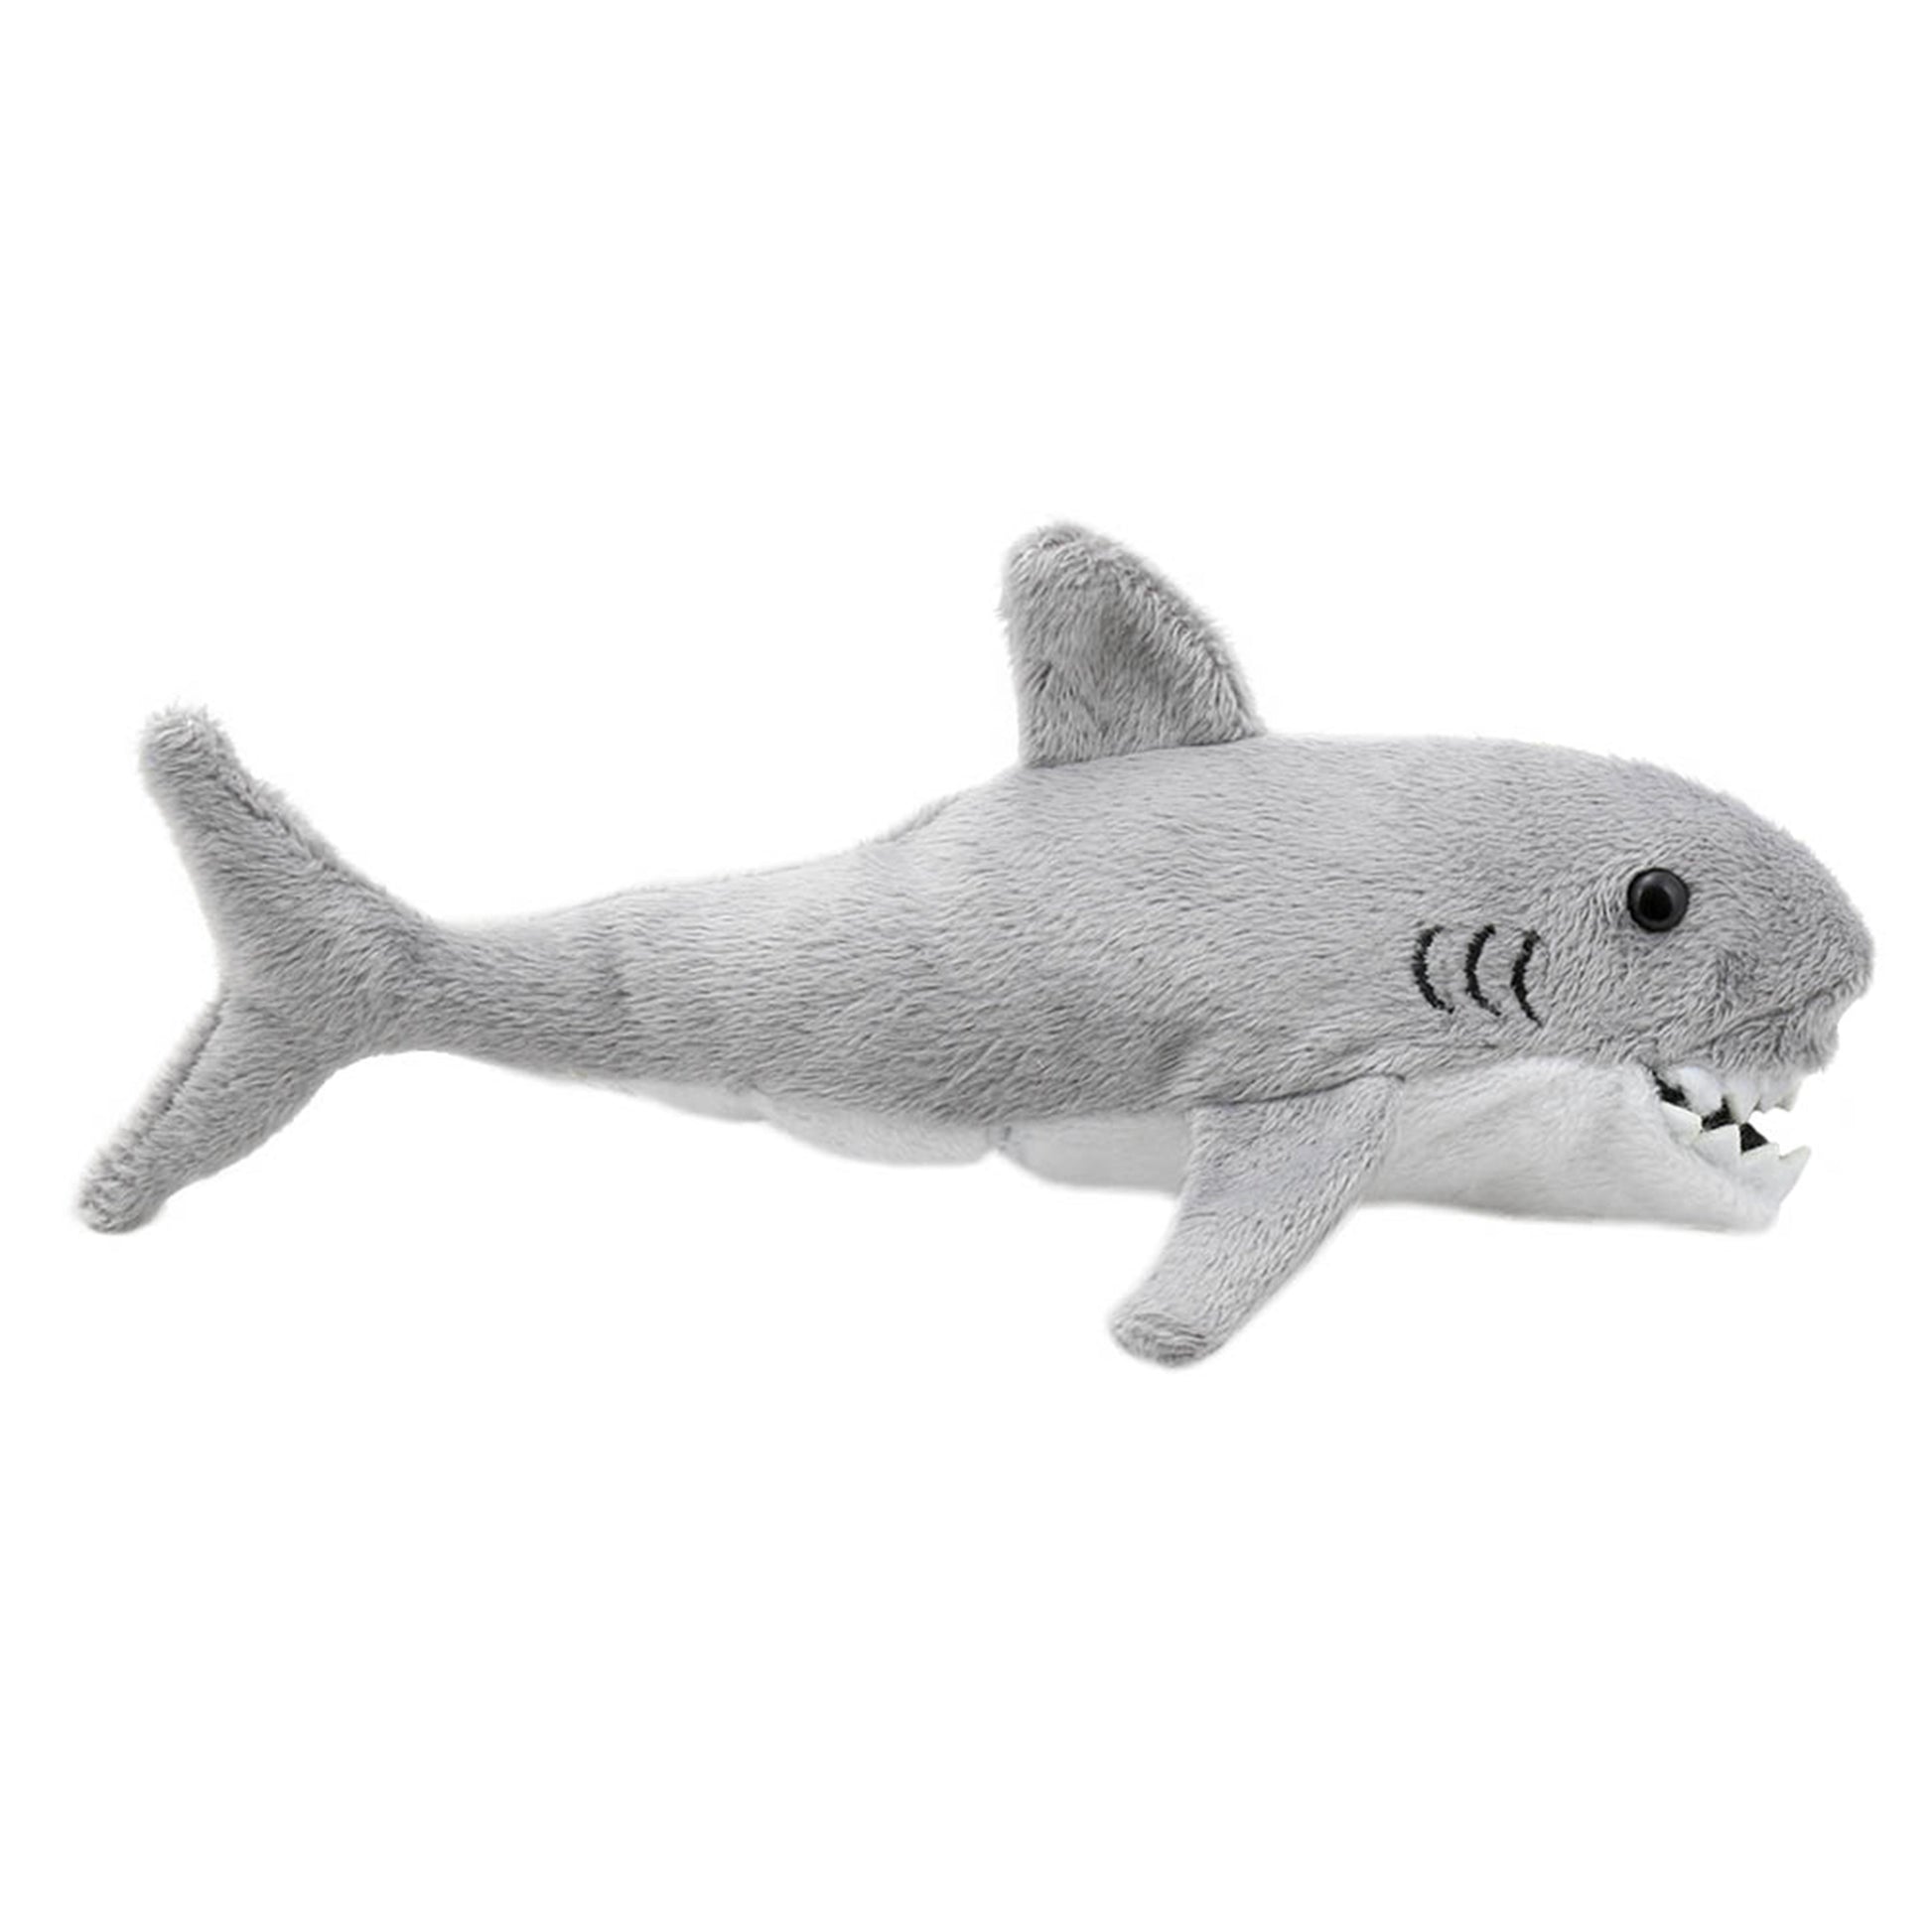 Shark (Great White) Finger Puppet - The Puppet Company - The Forgotten Toy Shop